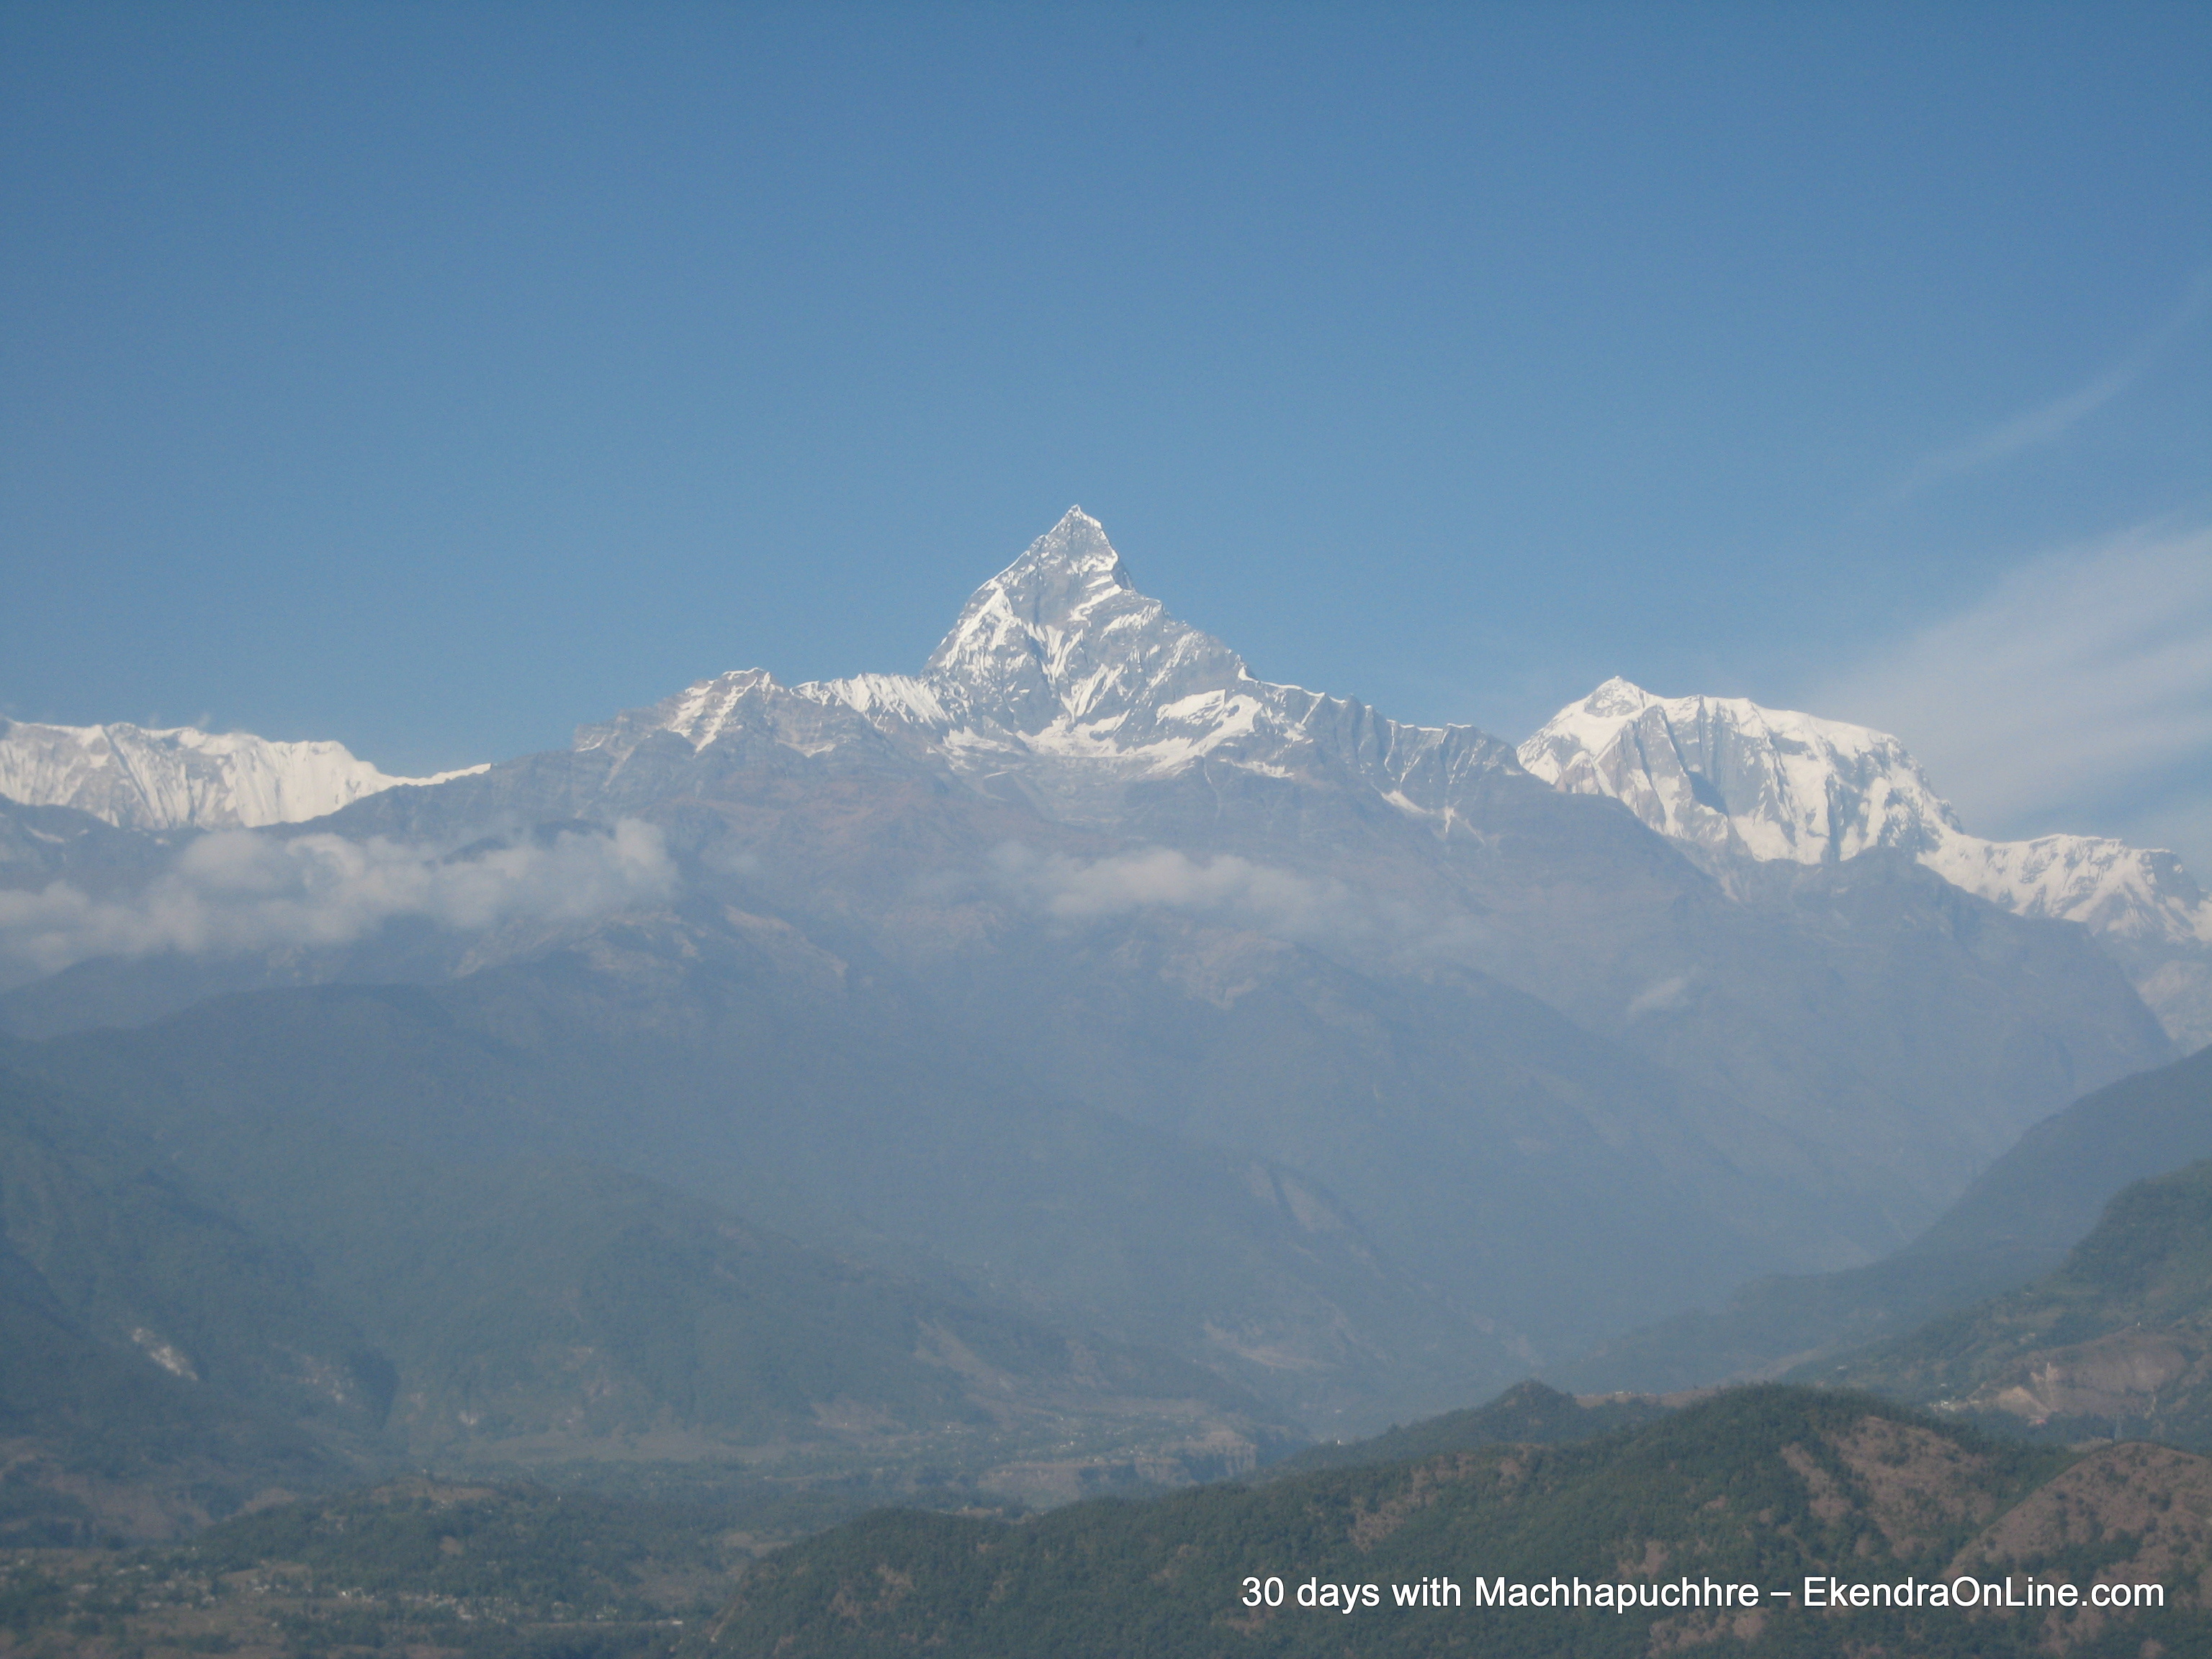 Cool Machhapuchhre as Seen from my Home in Pokhara, Nov 30th, 2011